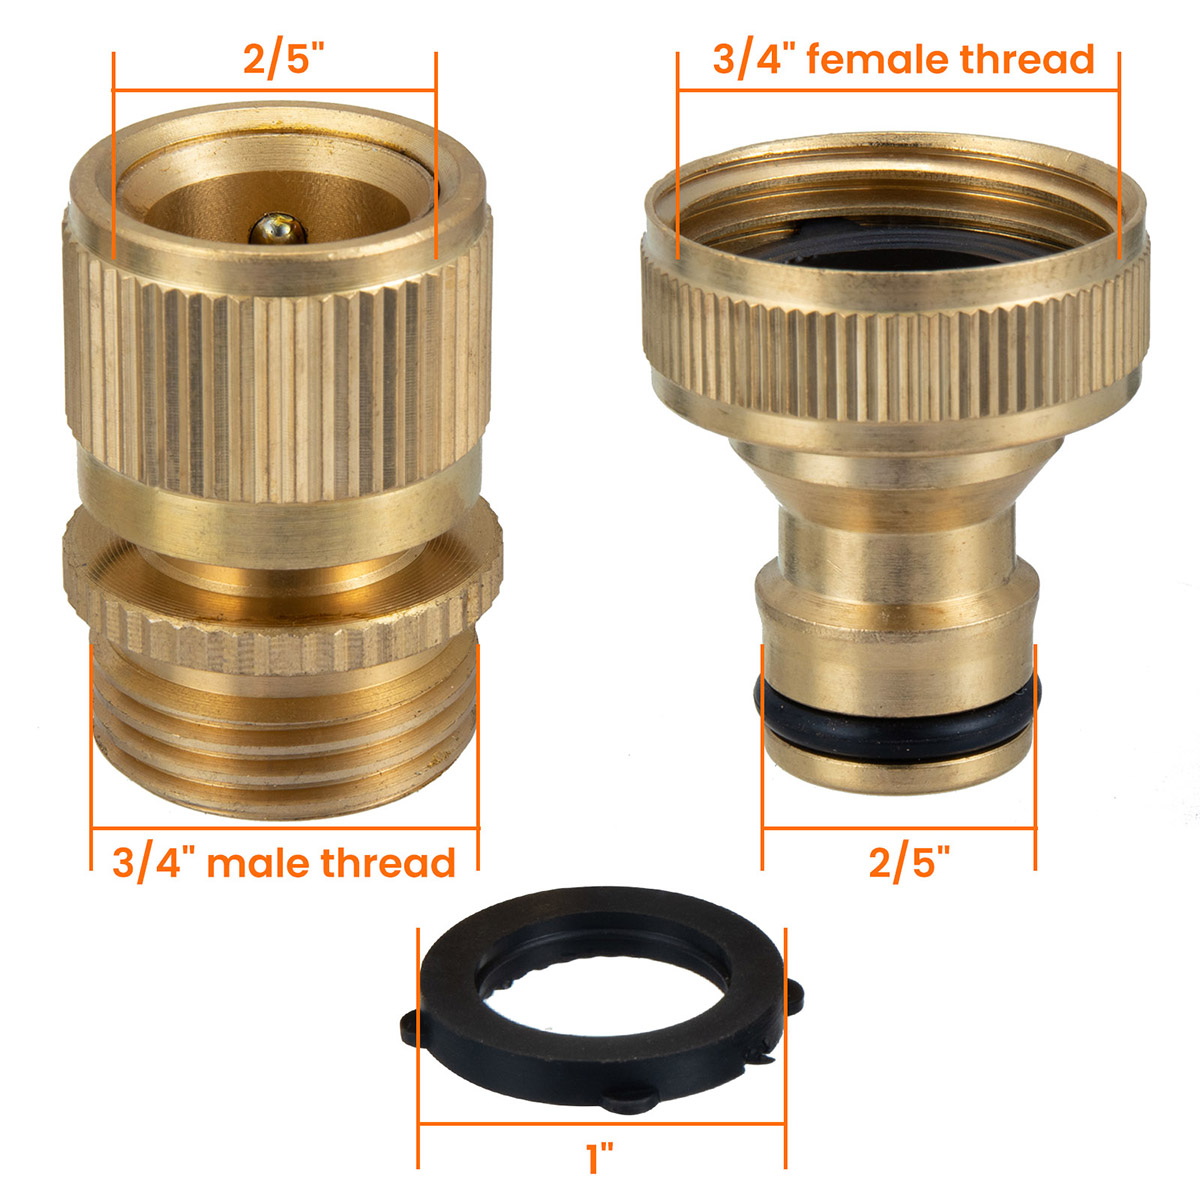 MATCC-Brass-Inner-Teeth-Quick-Connector-Set-34quot-GHT-Brass-Garden-Hose-Quick-Connector-With-Washer-1898352-6